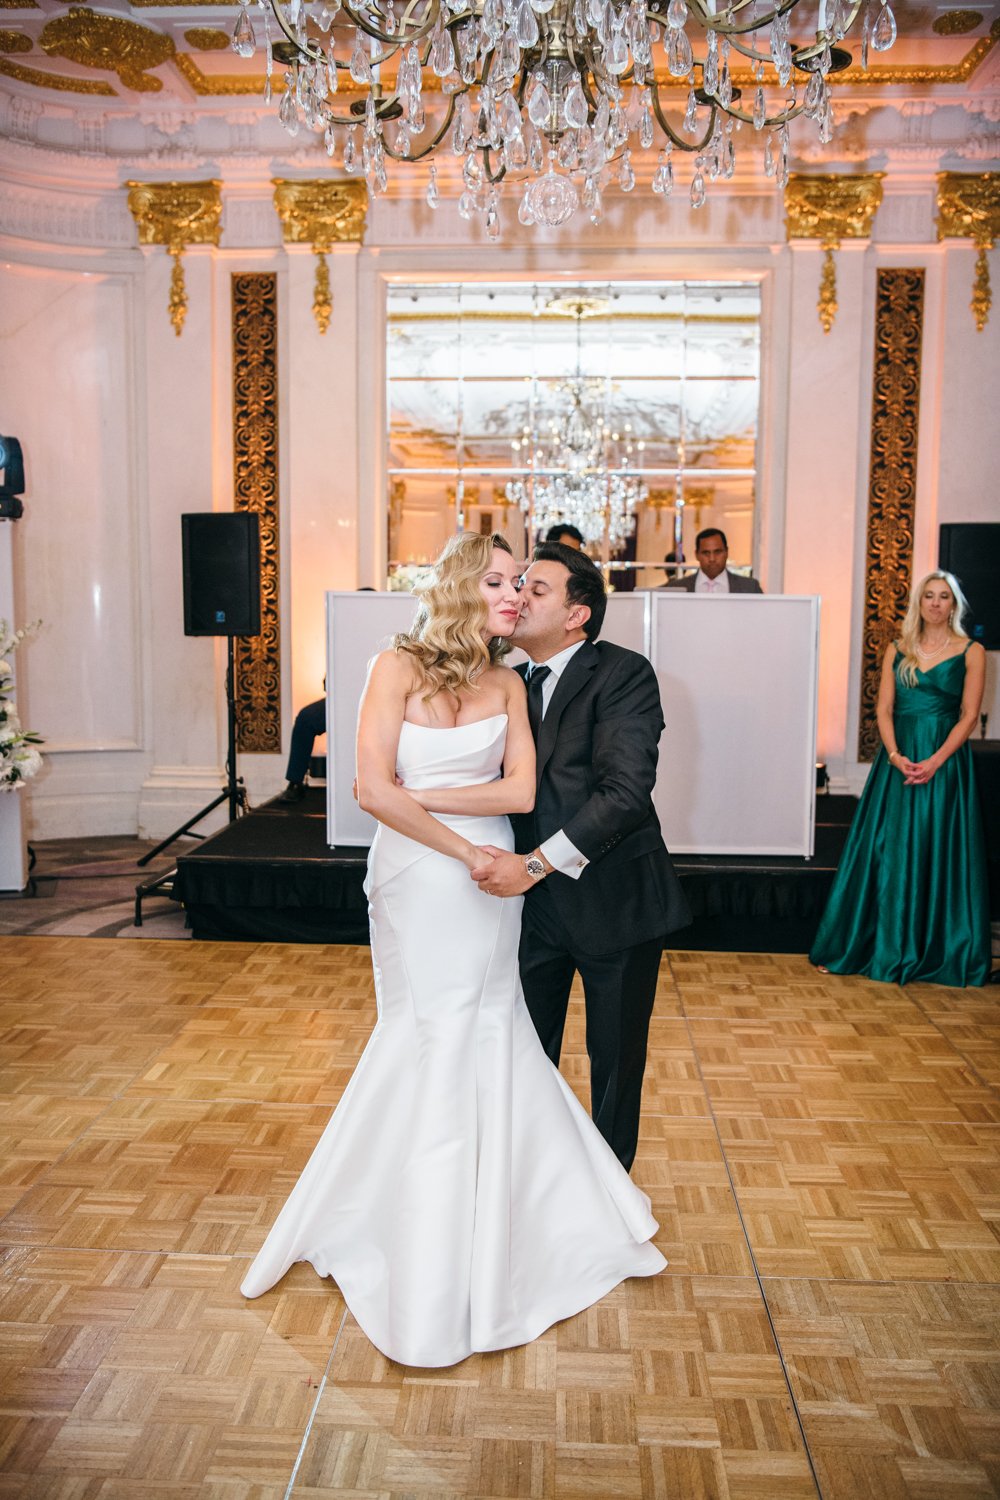 Bride and groom stand in each other's arms and kiss each other on the cheek on the dance floor at the St. Regis.

Manhattan Luxury Wedding. New York Luxury Wedding Photographer. Wedding in Manhattan. NYC Luxury Wedding.